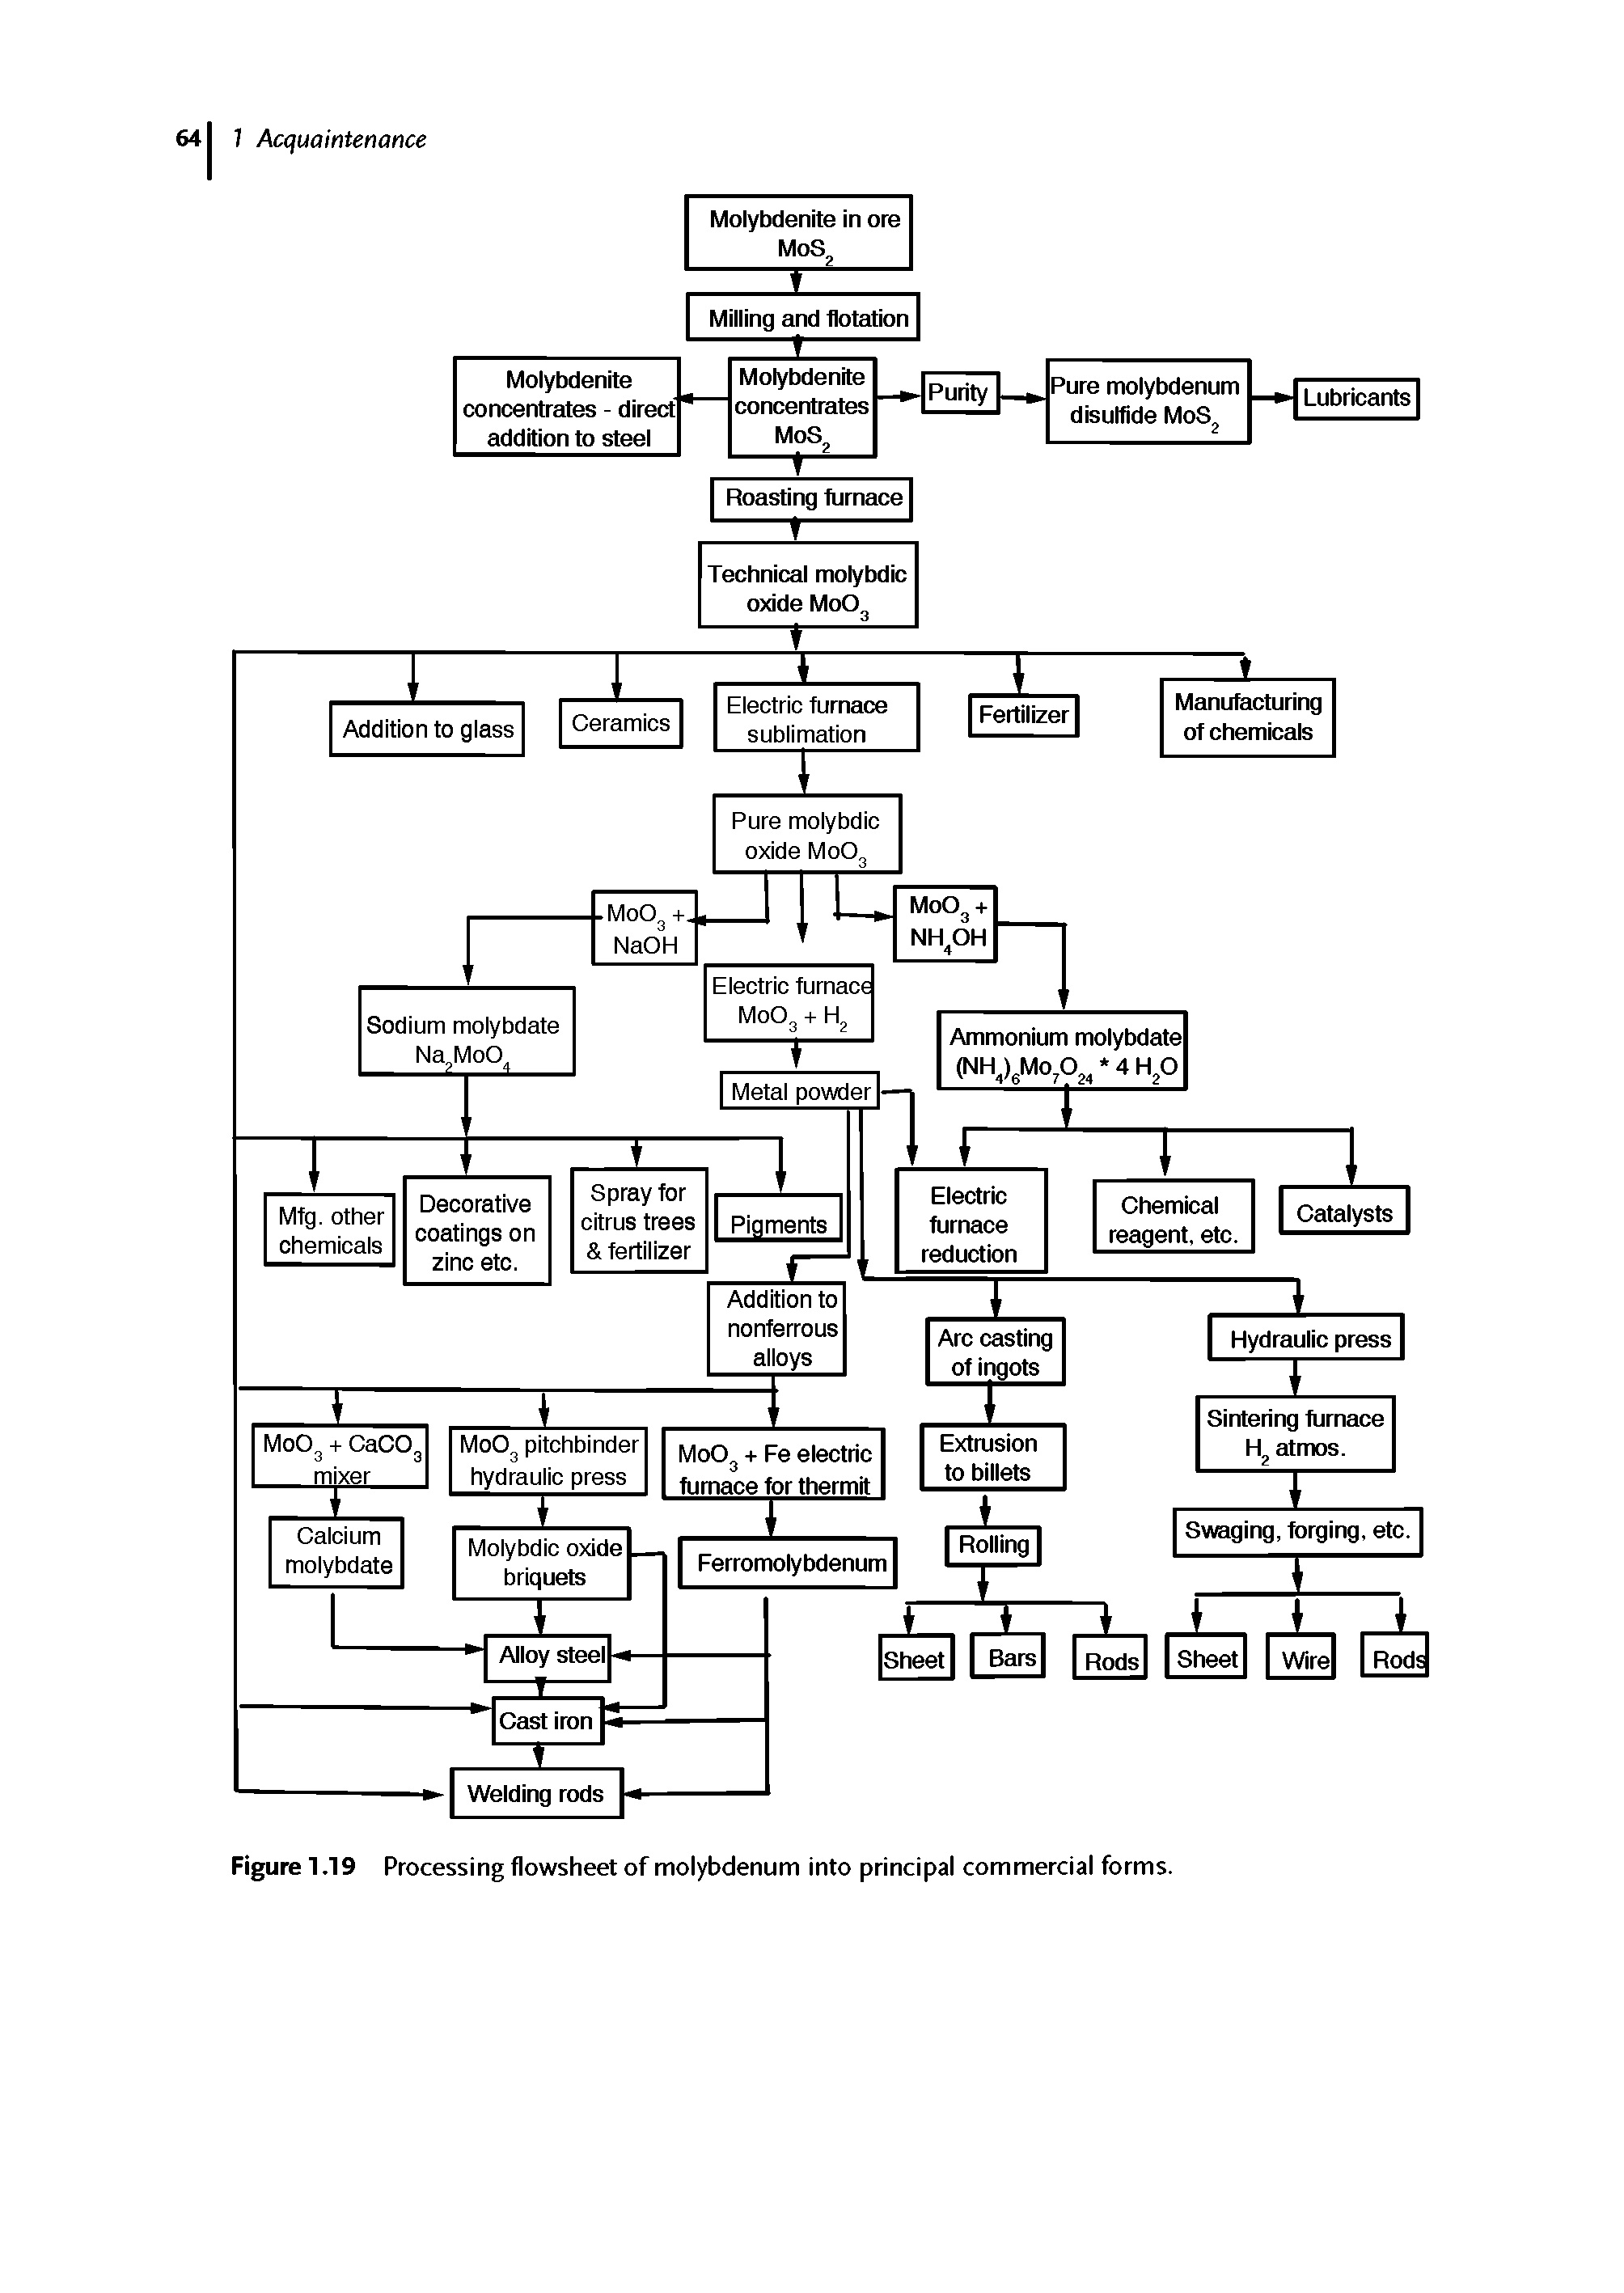 Figure 1.19 Processing flowsheet of molybdenum into principal commercial forms.